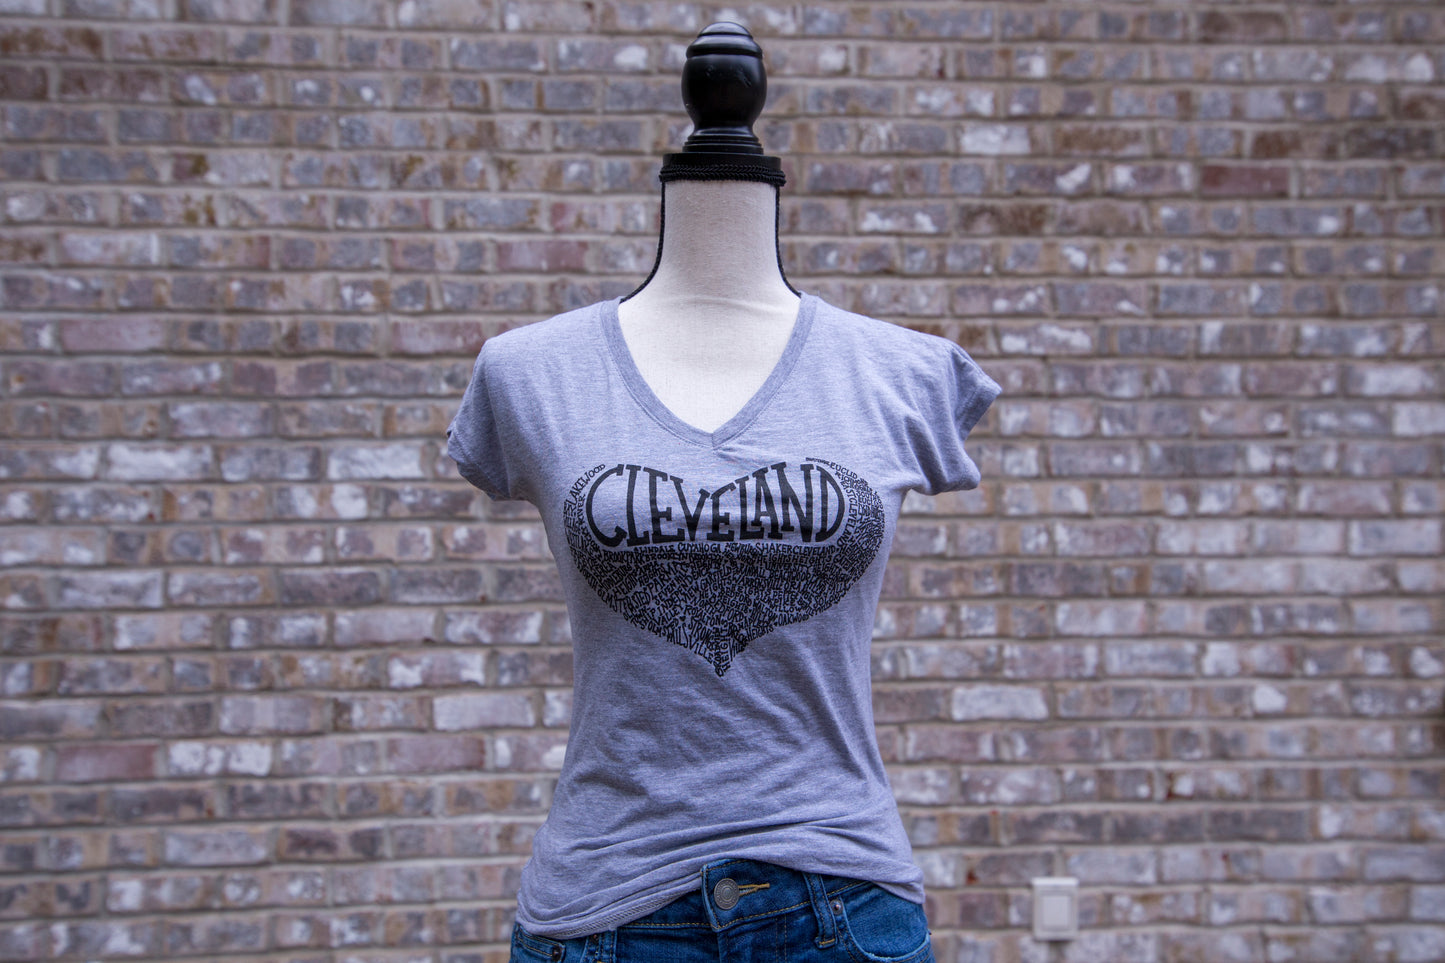 Everybody's Cleveland Short Sleeved Tee